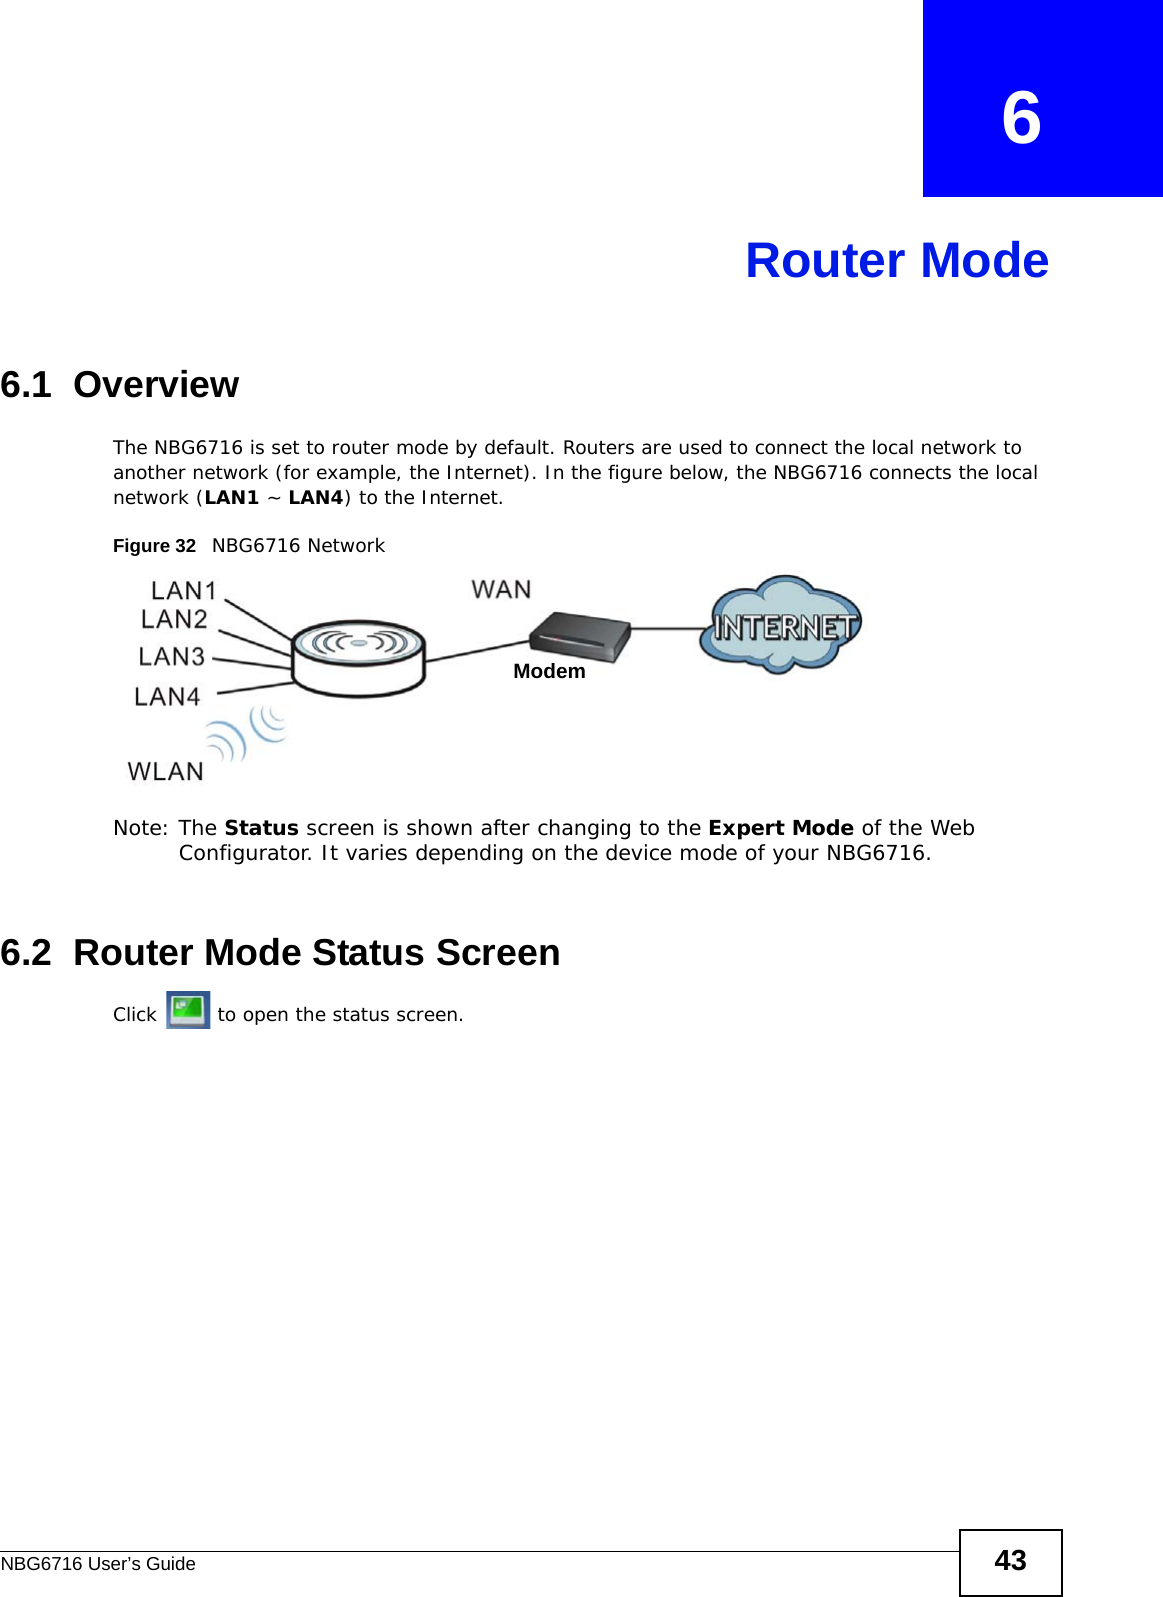 NBG6716 User’s Guide 43CHAPTER   6Router Mode6.1  OverviewThe NBG6716 is set to router mode by default. Routers are used to connect the local network to another network (for example, the Internet). In the figure below, the NBG6716 connects the local network (LAN1 ~ LAN4) to the Internet.Figure 32   NBG6716 NetworkNote: The Status screen is shown after changing to the Expert Mode of the Web Configurator. It varies depending on the device mode of your NBG6716.6.2  Router Mode Status ScreenClick   to open the status screen. Modem